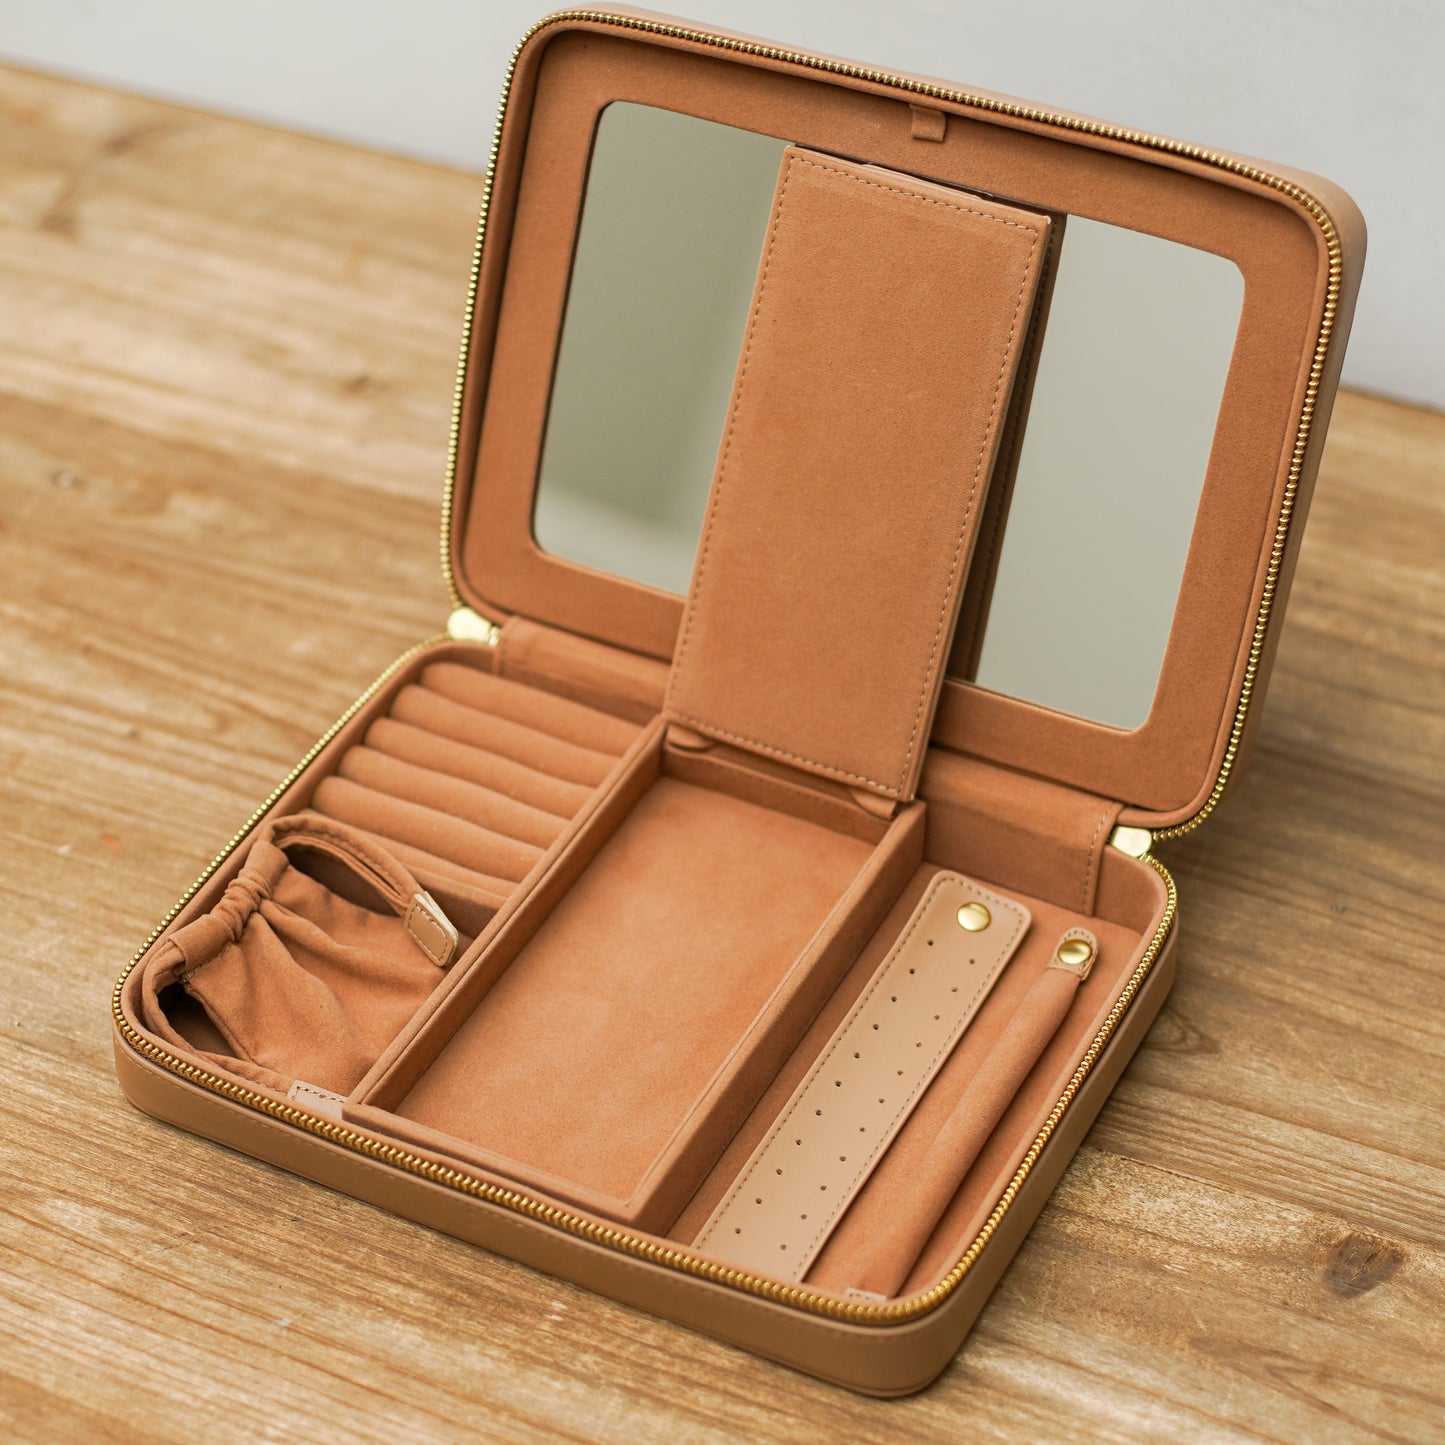 Large Two-Toned Travel Jewelry Case